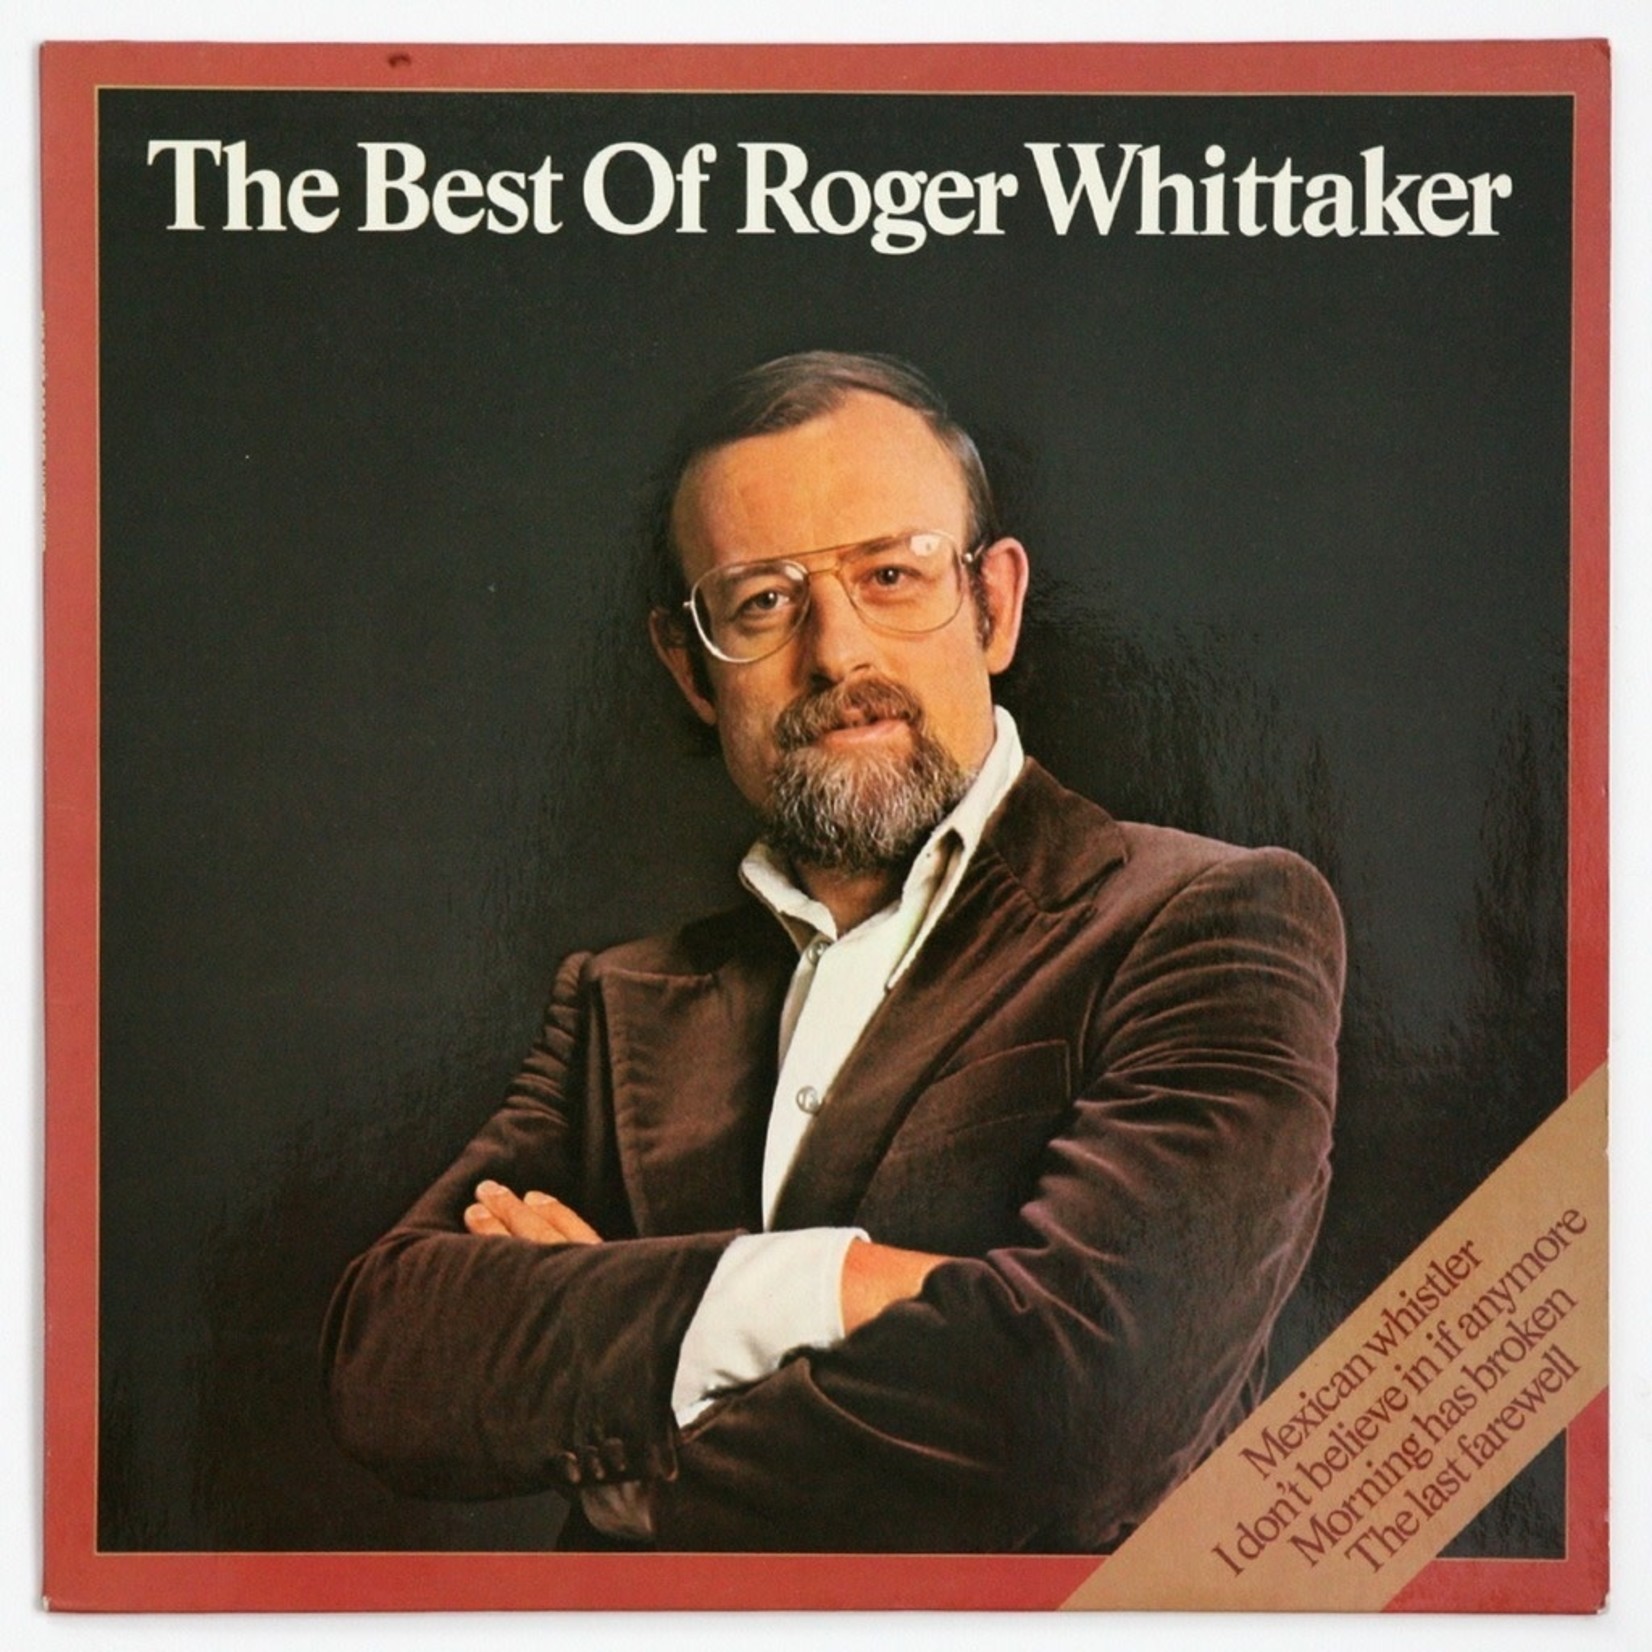 [Discontinued] Roger Whittaker - The Best of